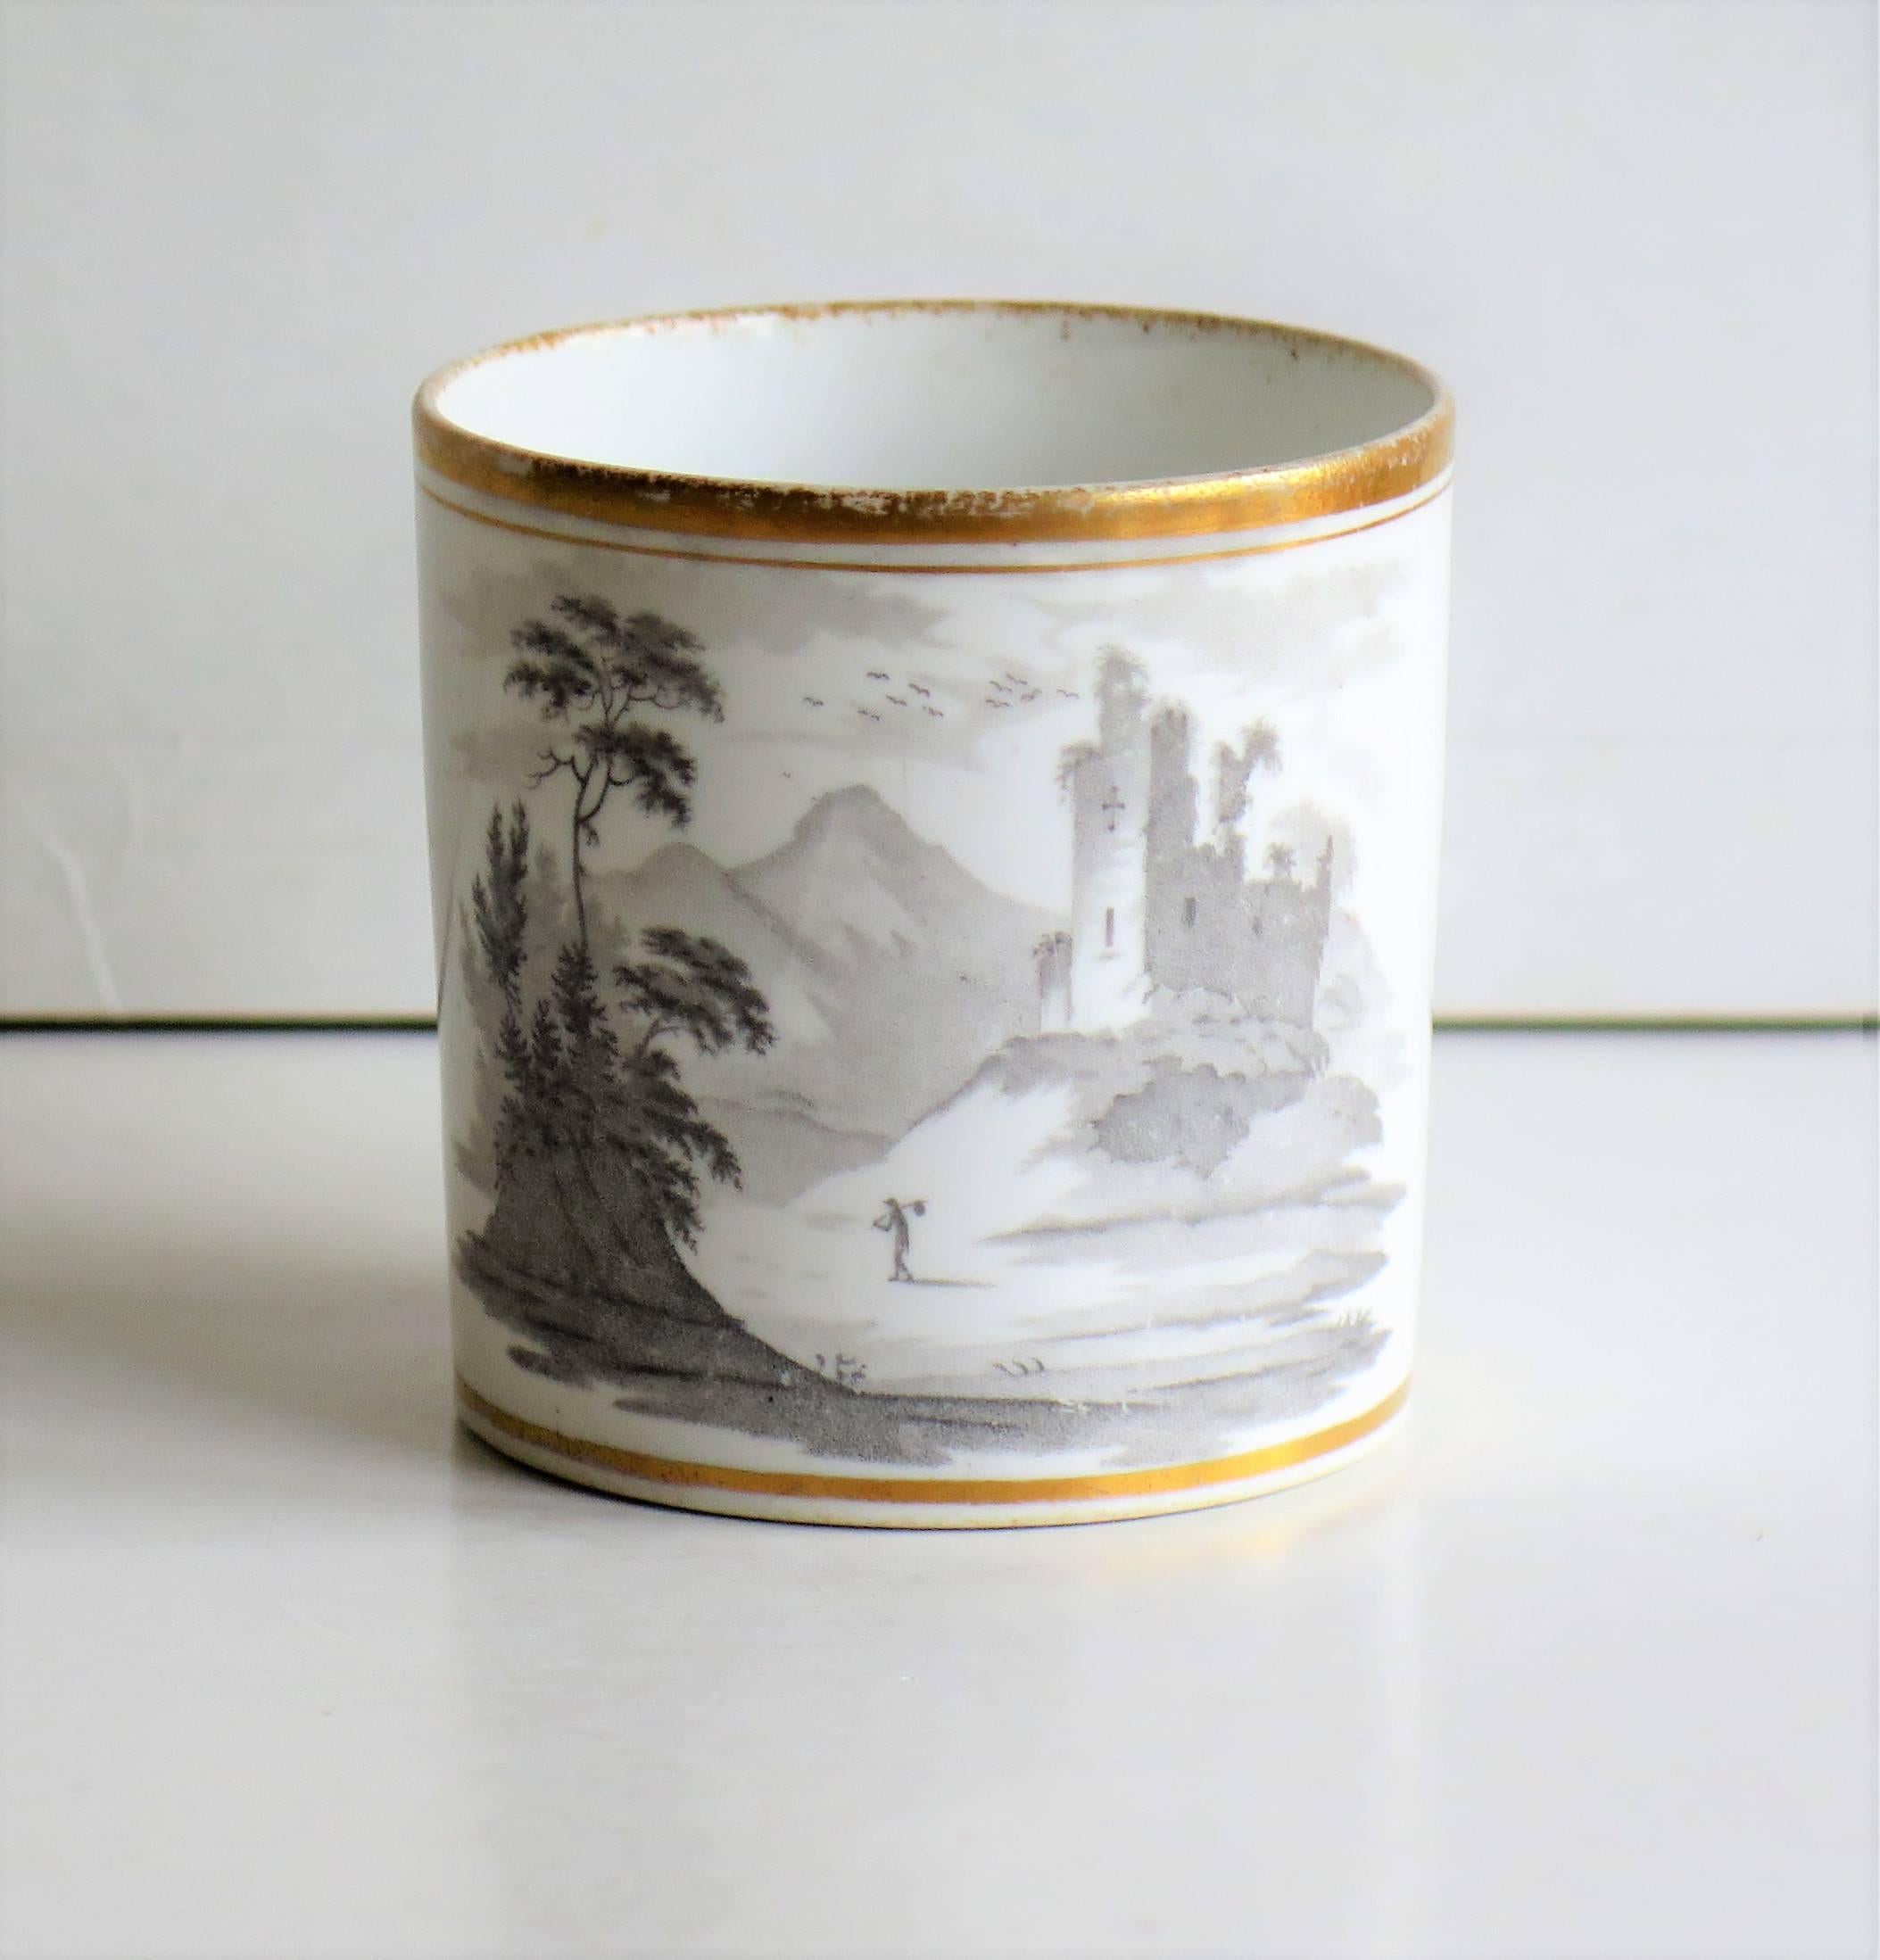 This is a good example of an English George III period, porcelain, coffee can, made by Spode, England in the early 19th century, circa 1810-1815.

The can is nominally straight sided and has the Spode loop handle with a pronounced kick or kink to